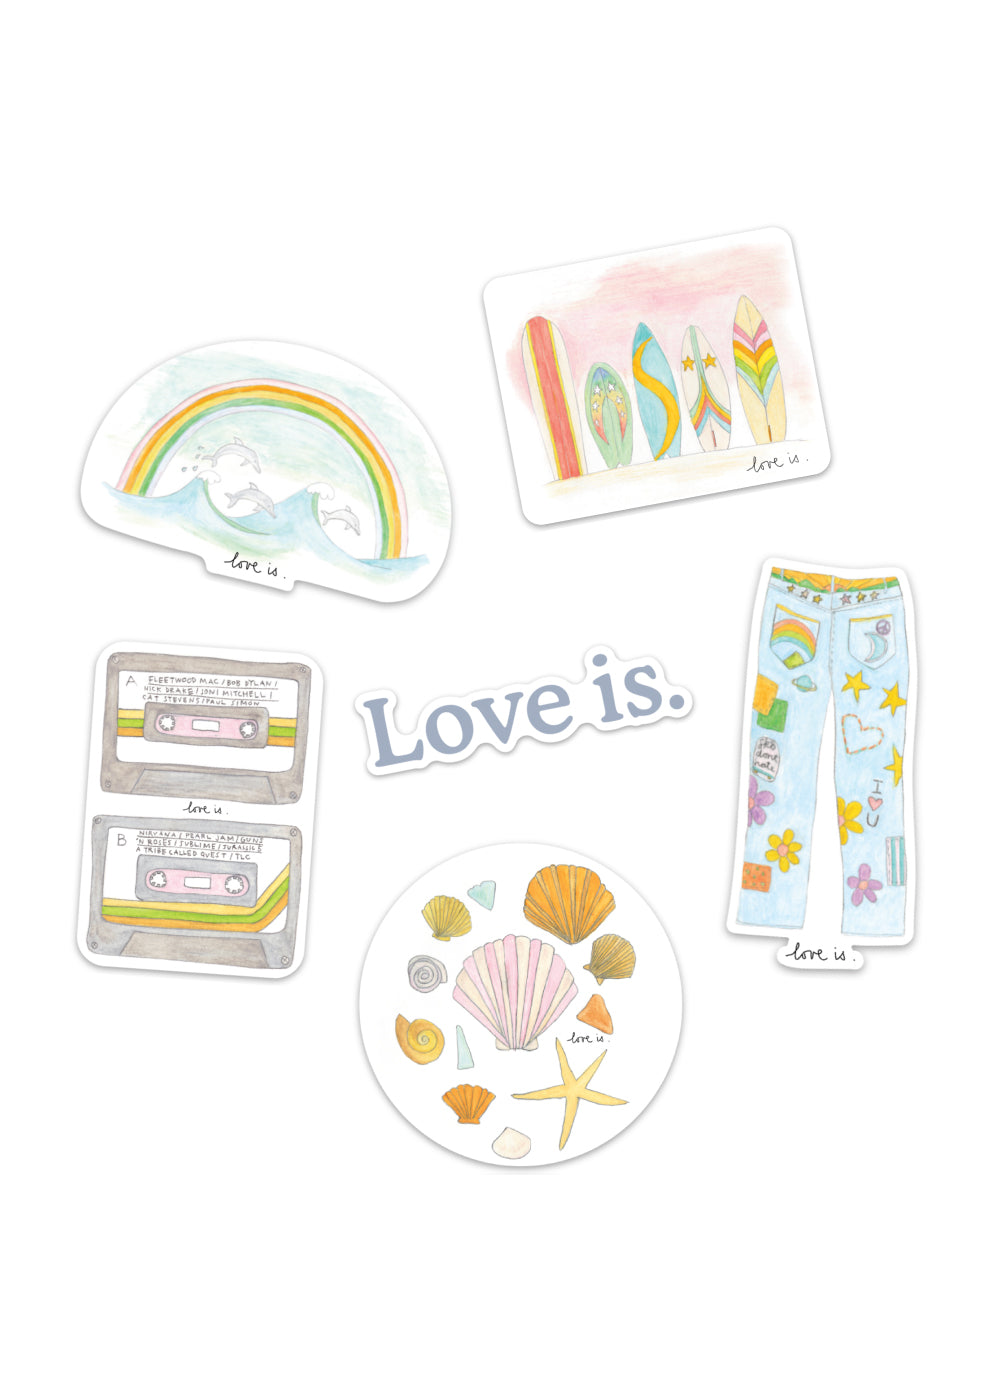 love is.♡ signed + sticker pack